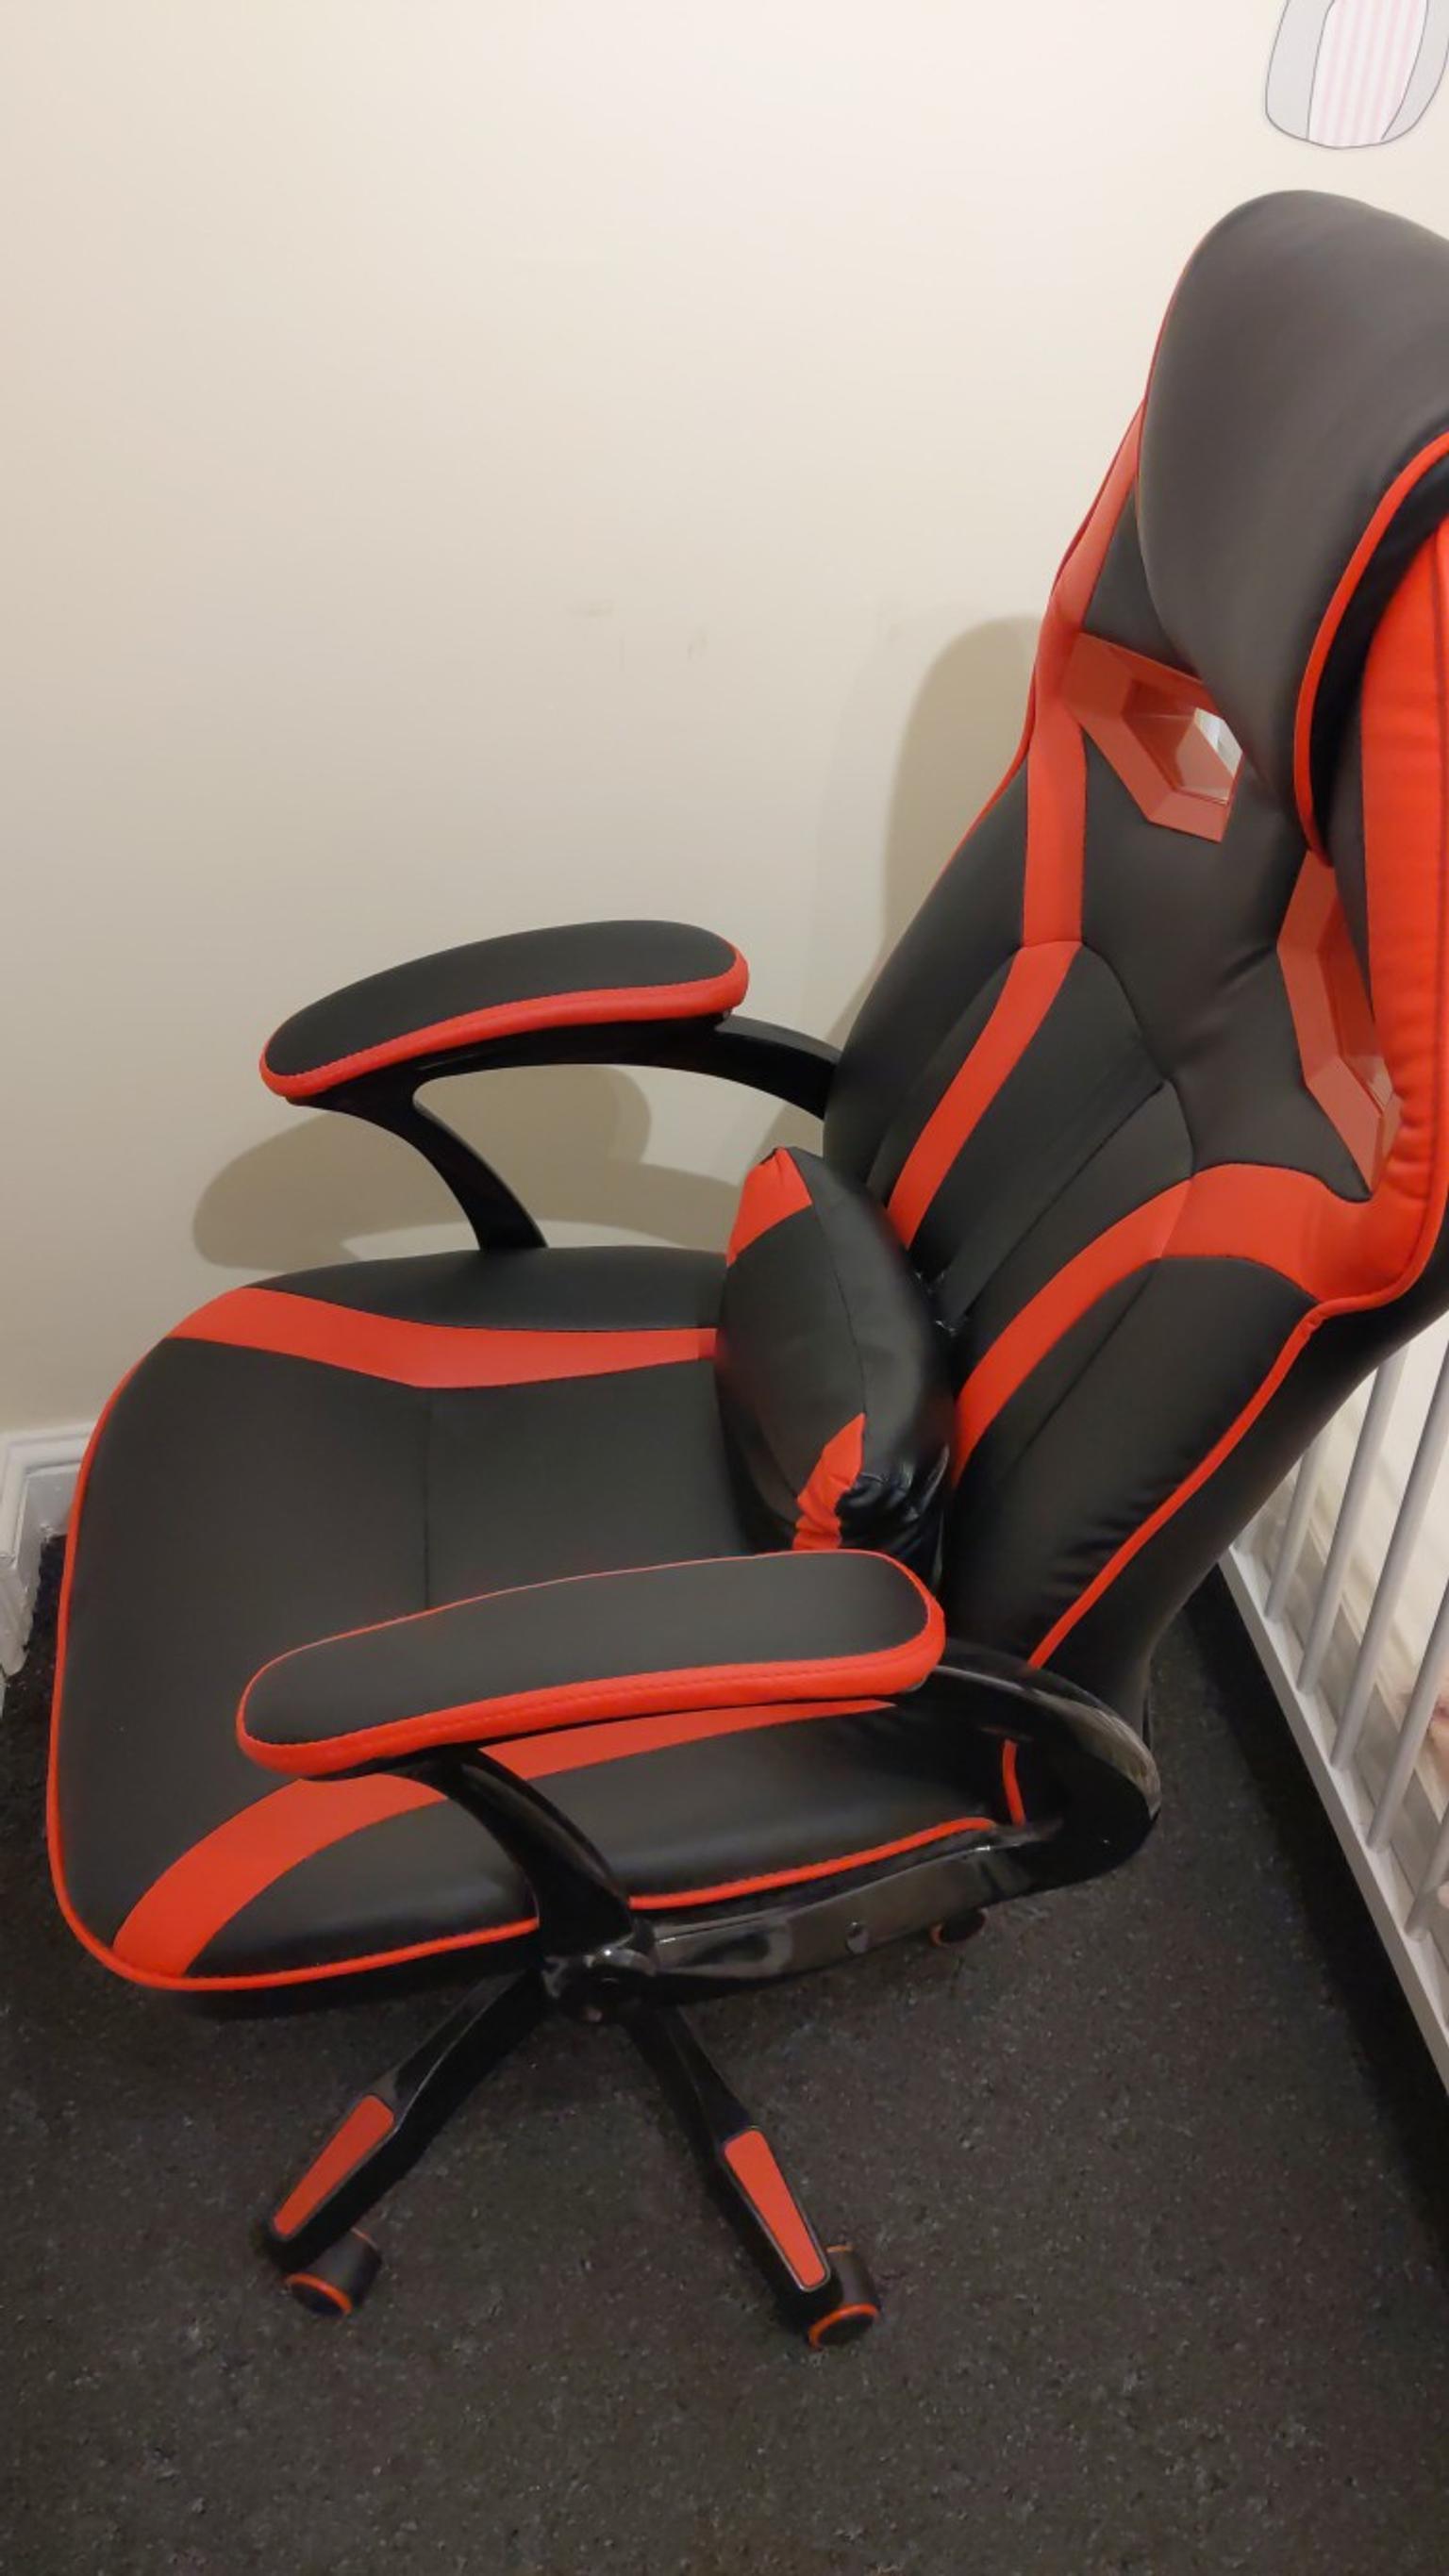 Red and Black office and gaming chair in Stevenage for £60